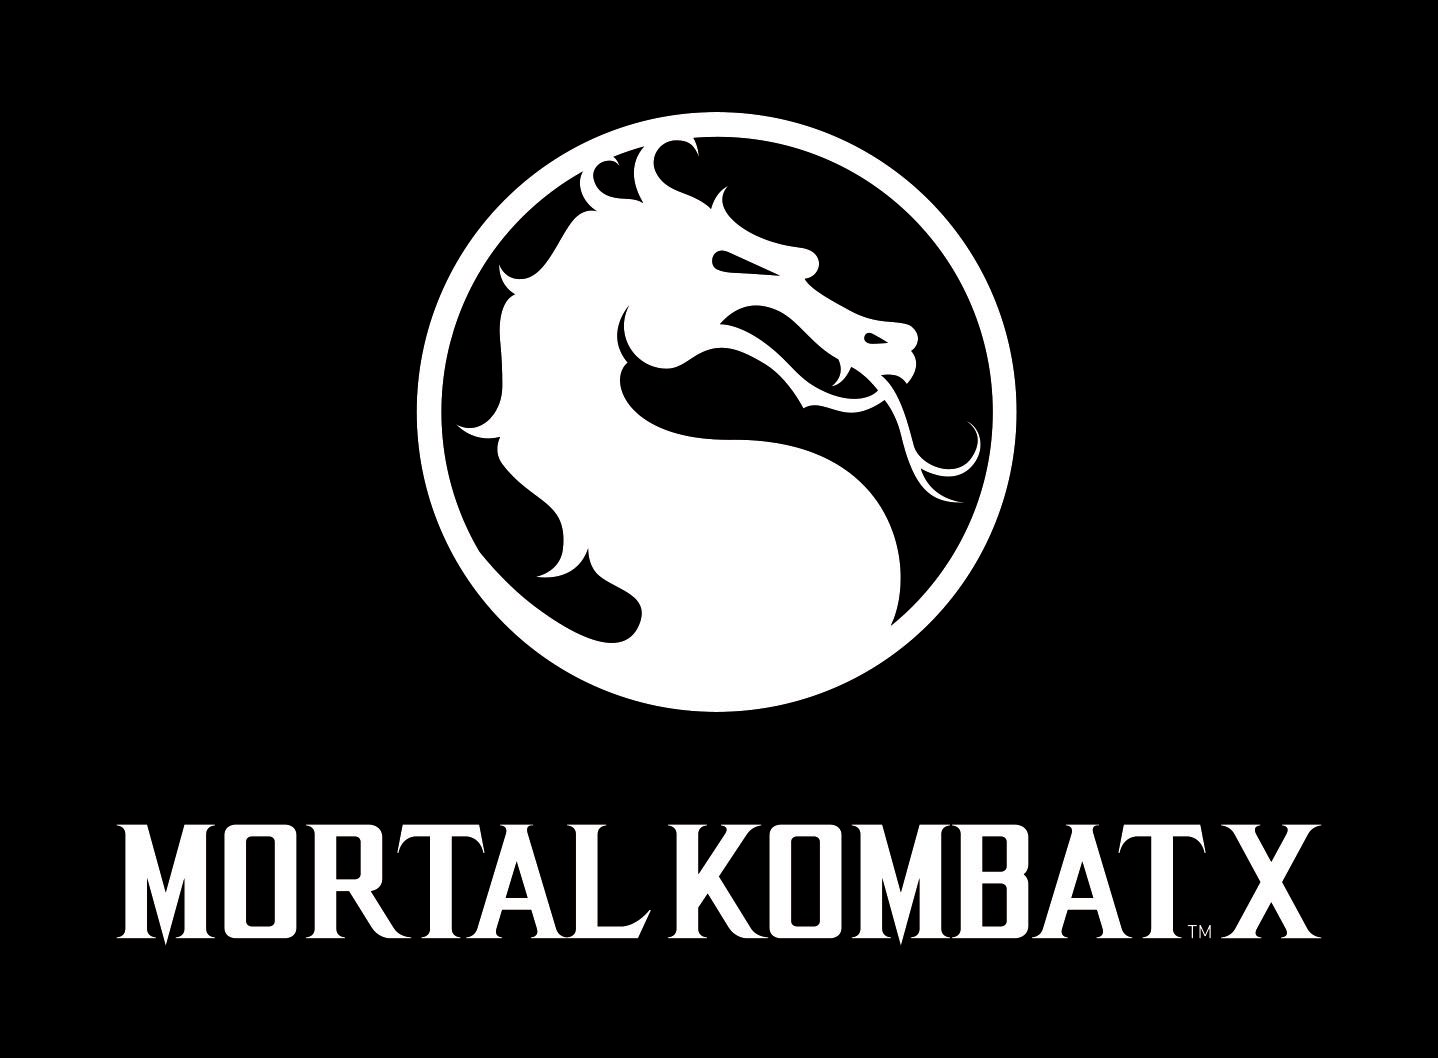 Mortal Kombat X Character List Ed Boon Teases More Fighters Showing